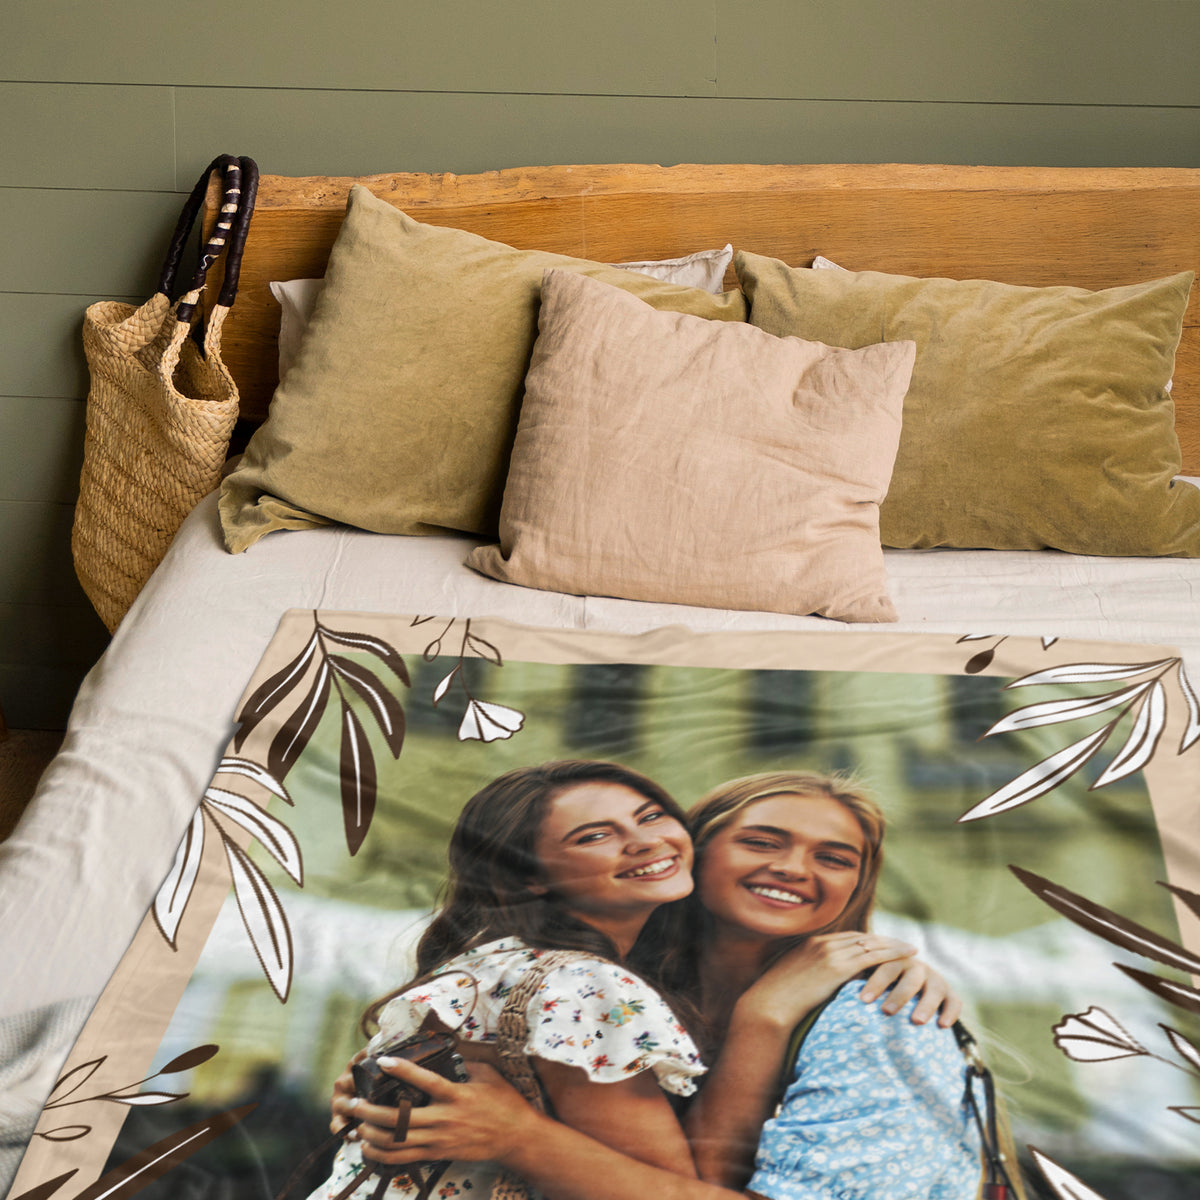 Celebrate Your Unbreakable Friendship with Personalized Gifts Preserve Your Story